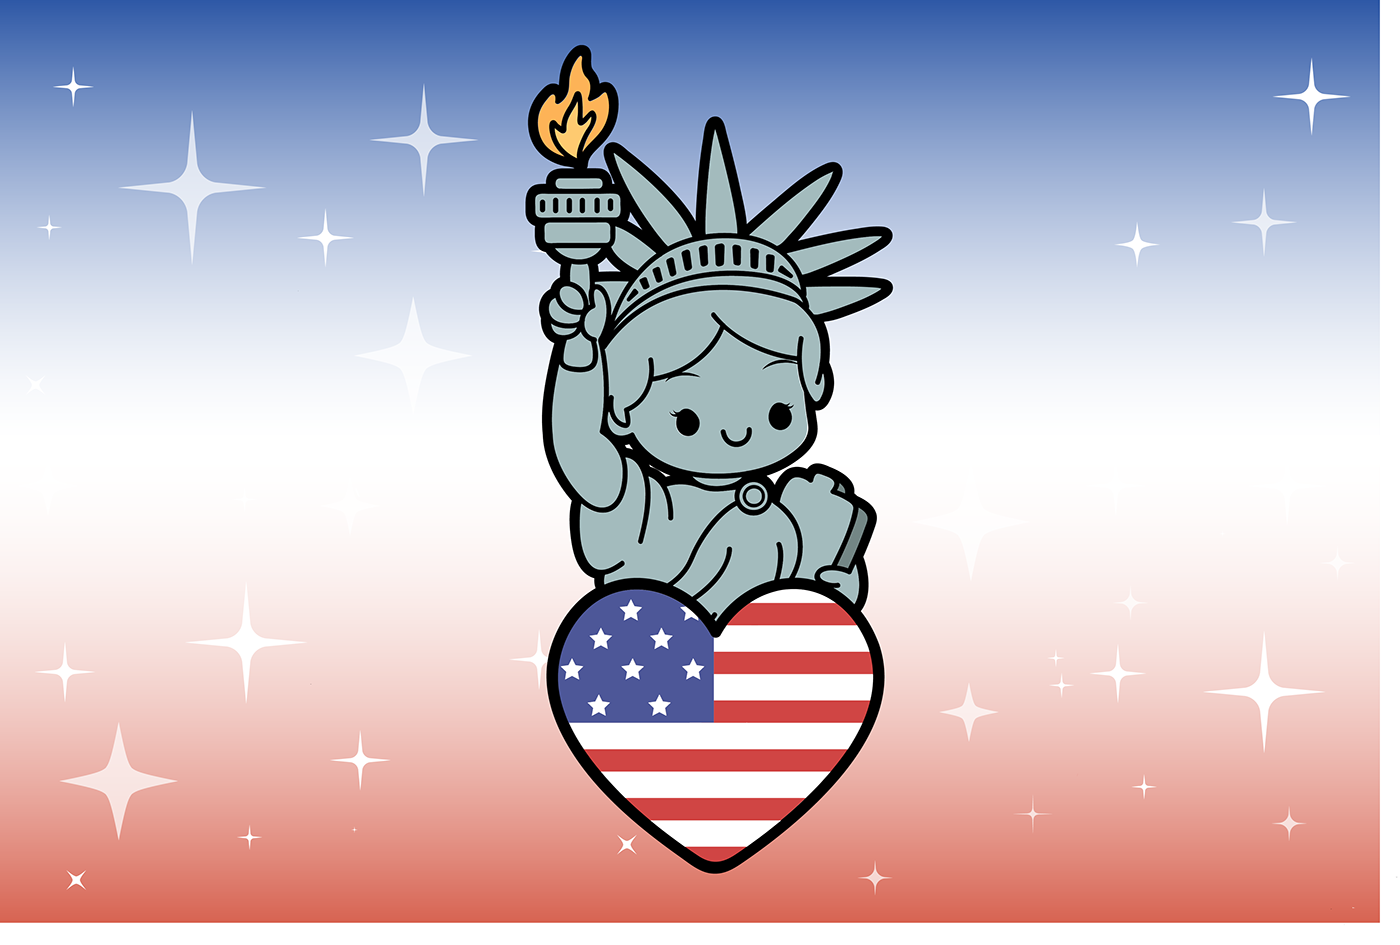 statue of liberty new york city american flag 4th of July independence day heart cute chibi cartoon